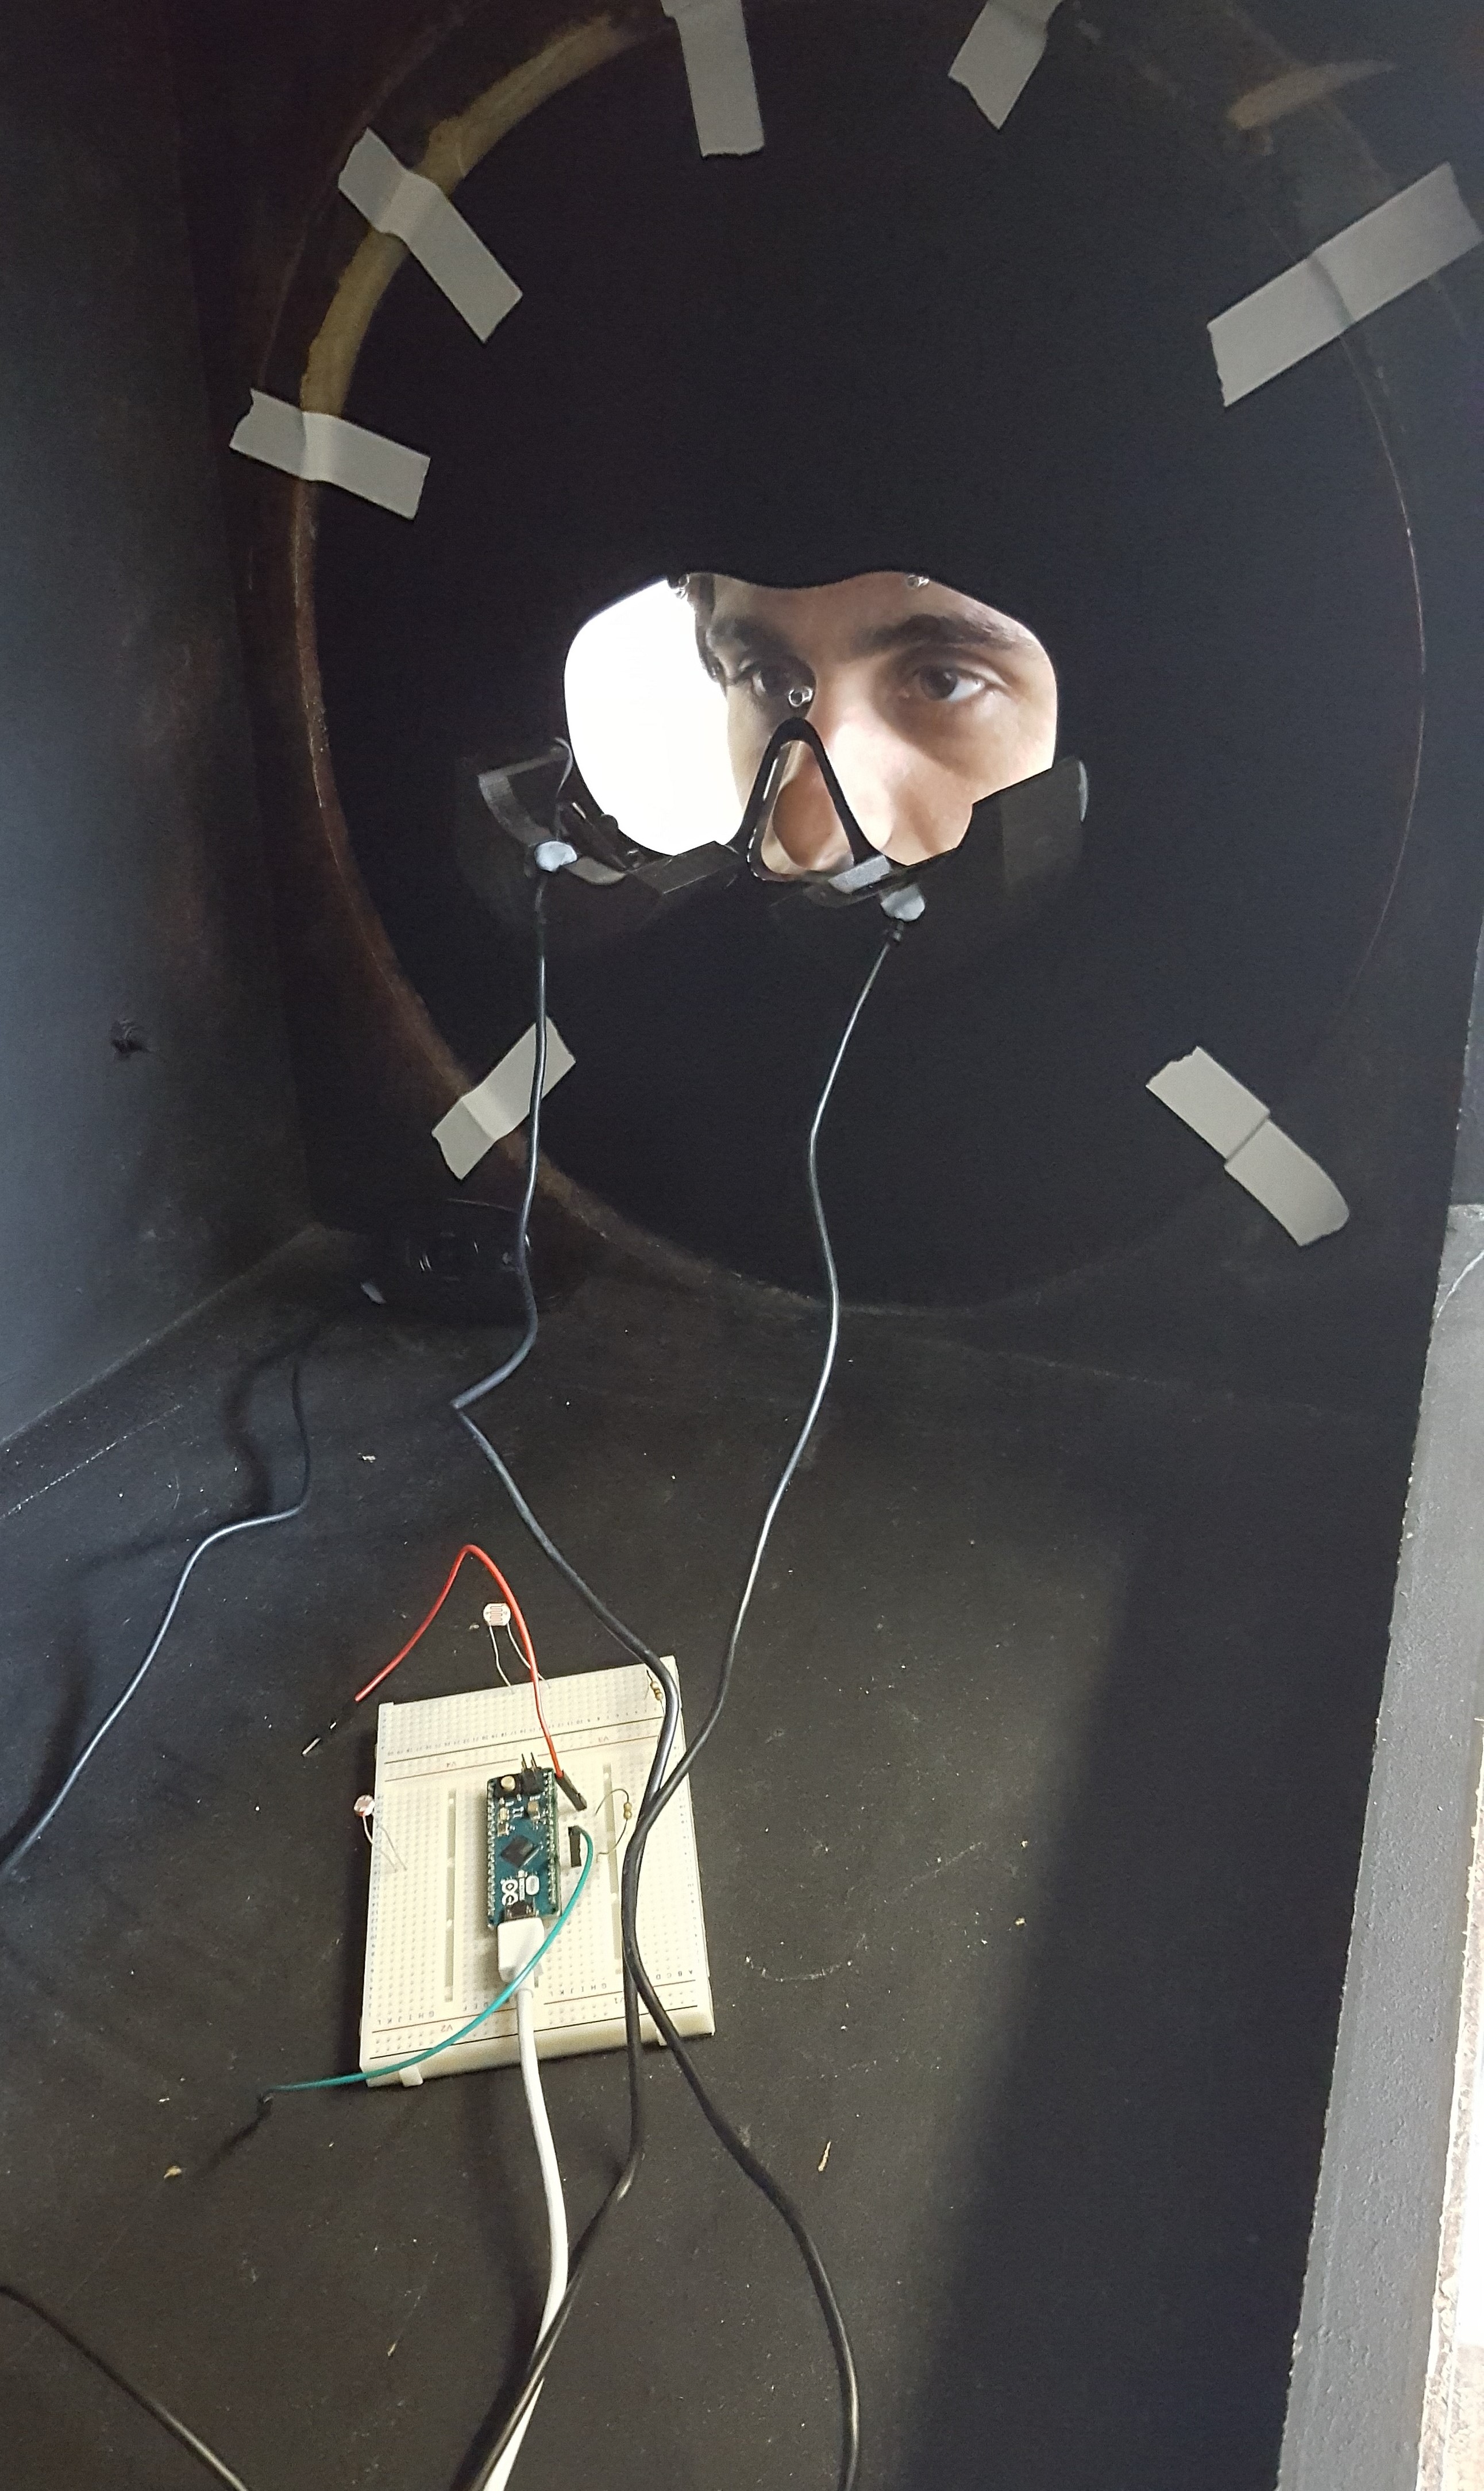 Goncalo peers through the face plate of the interactive station.